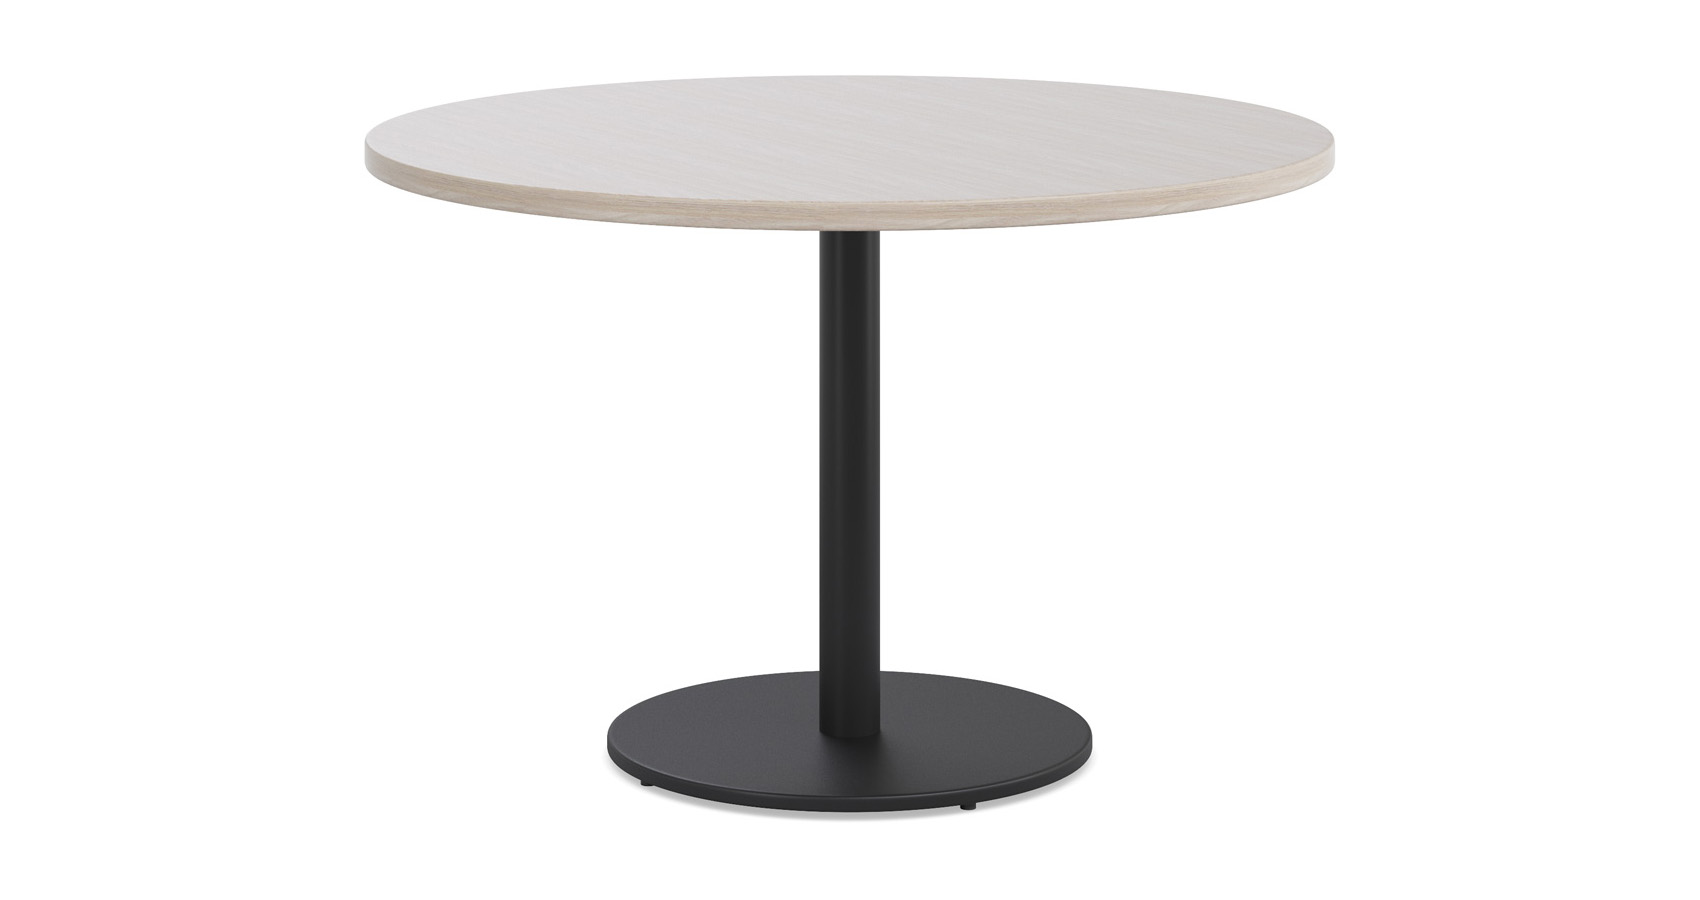 Halo Round Conference Table